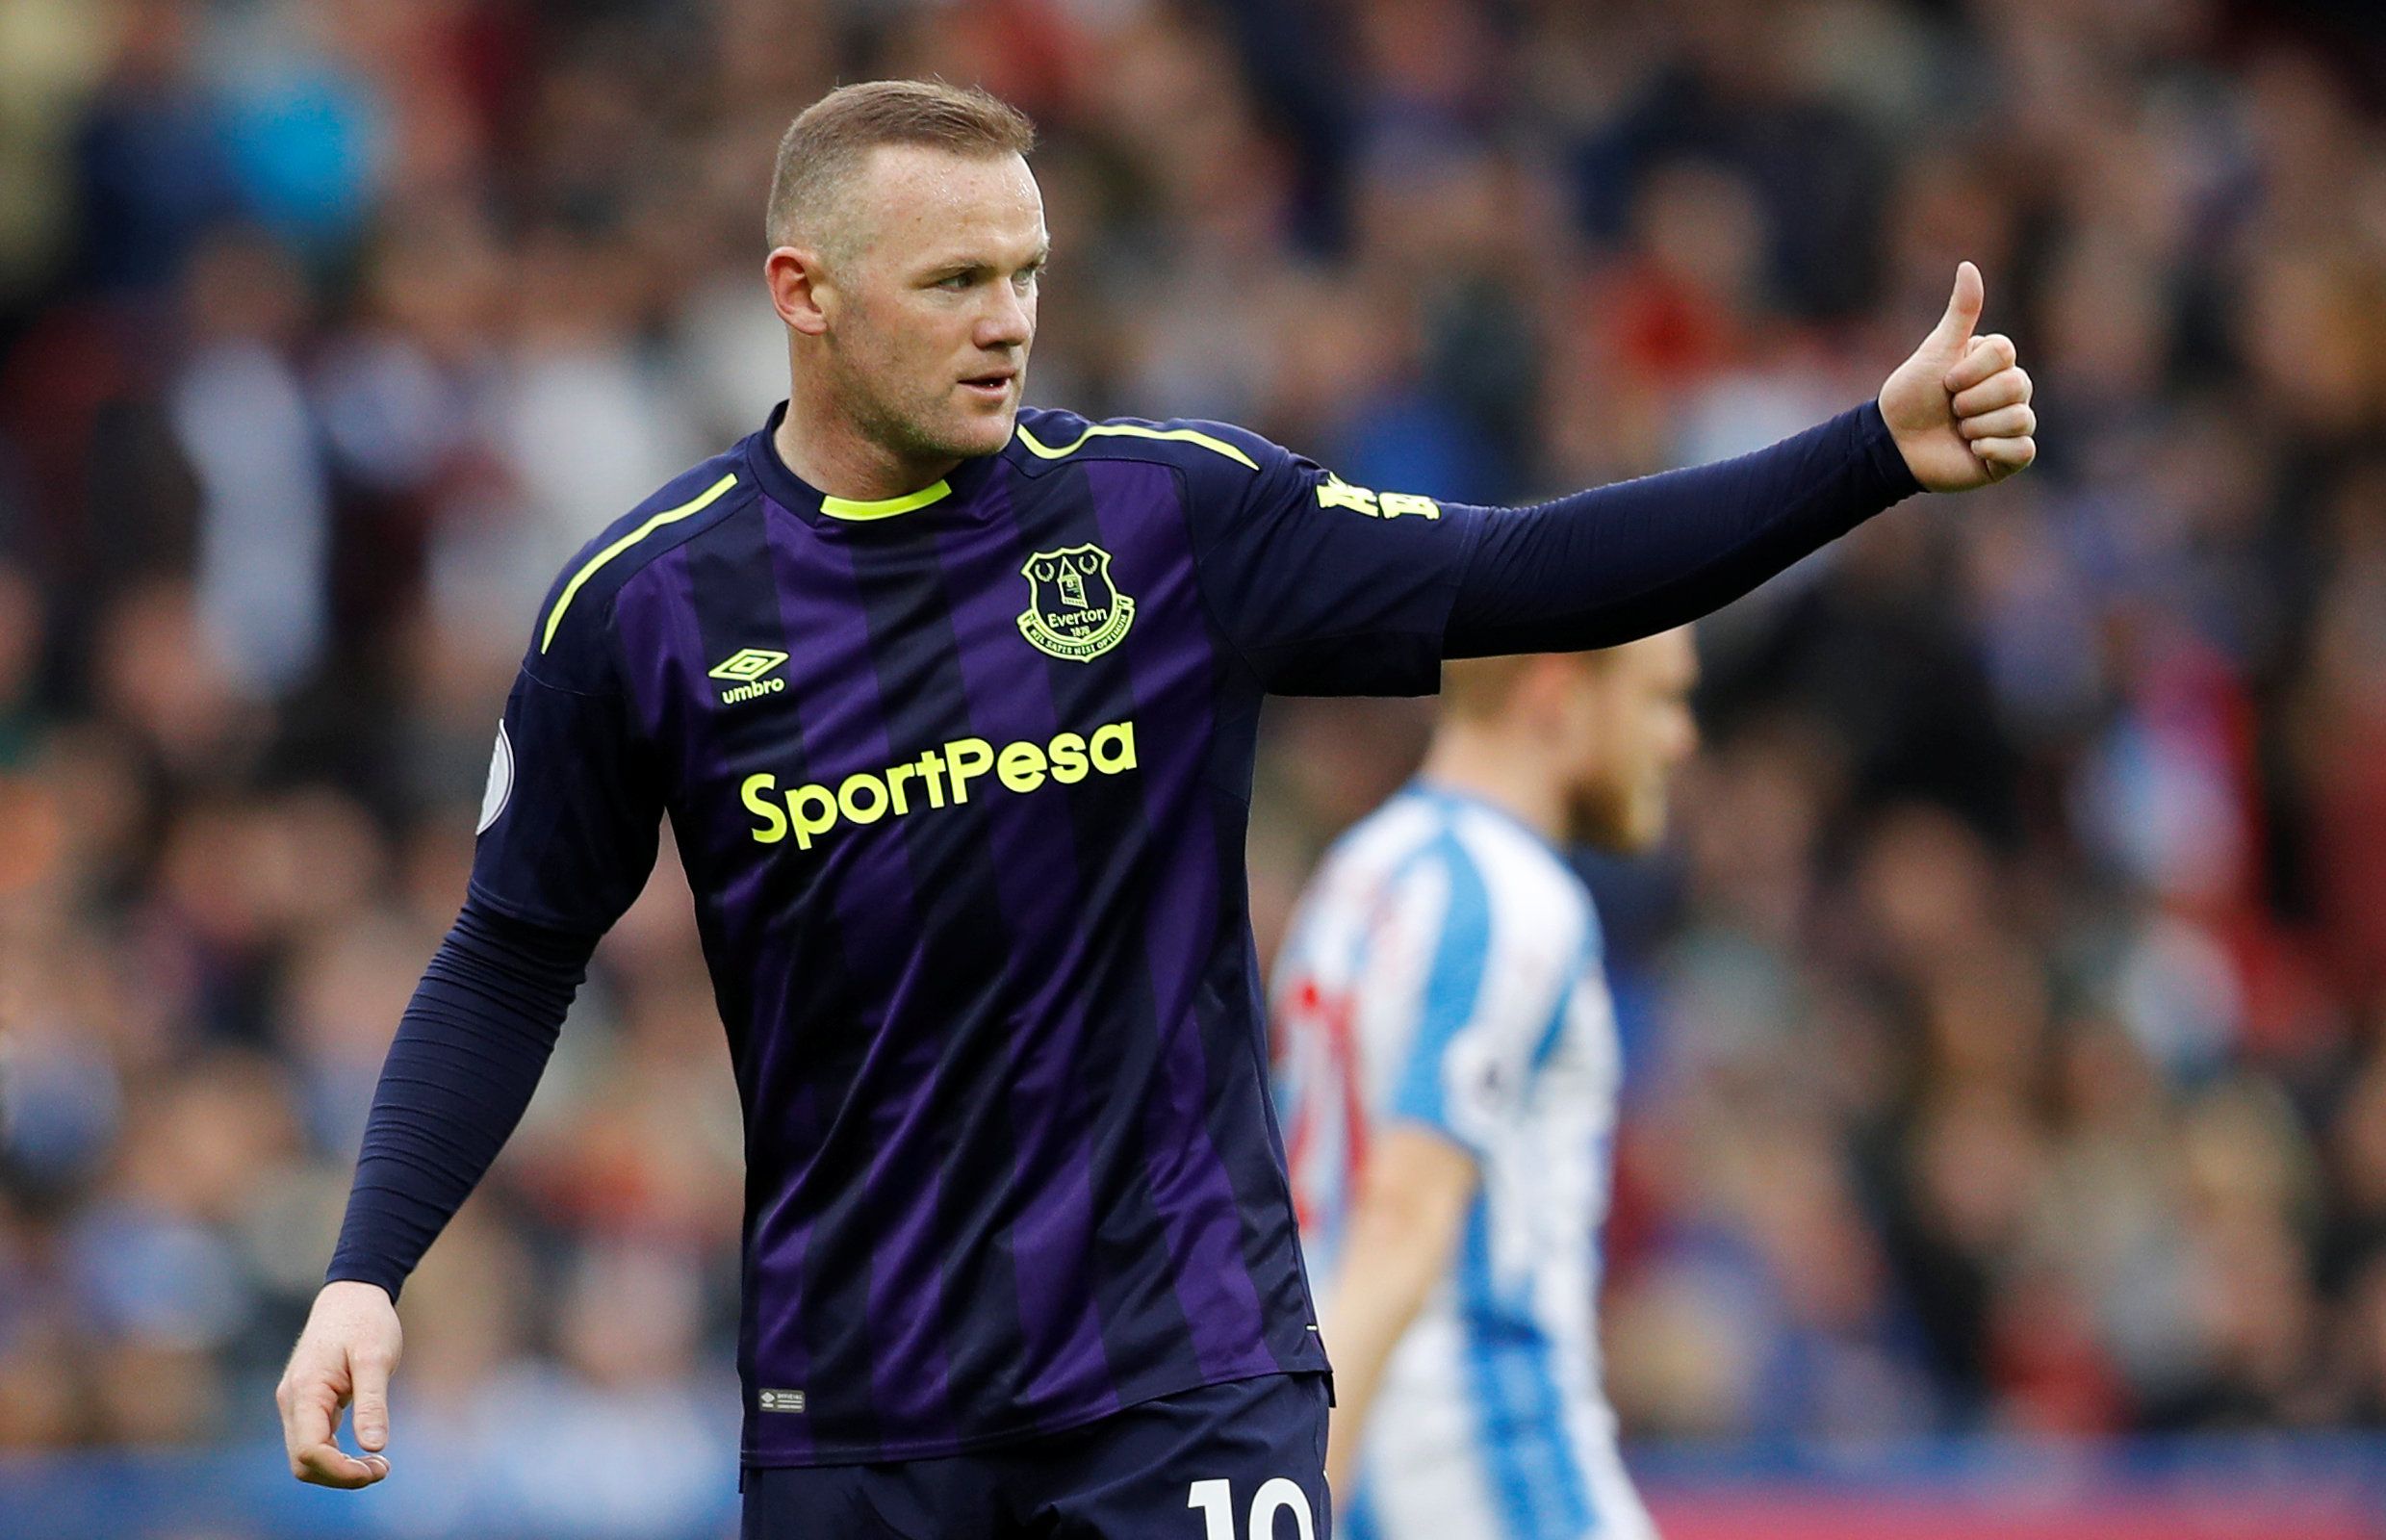 Soccer Football - Premier League - Huddersfield Town v Everton - John Smith's Stadium, Huddersfield, Britain - April 28, 2018   Everton's Wayne Rooney        REUTERS/Darren Staples    EDITORIAL USE ONLY. No use with unauthorized audio, video, data, fixture lists, club/league logos or 